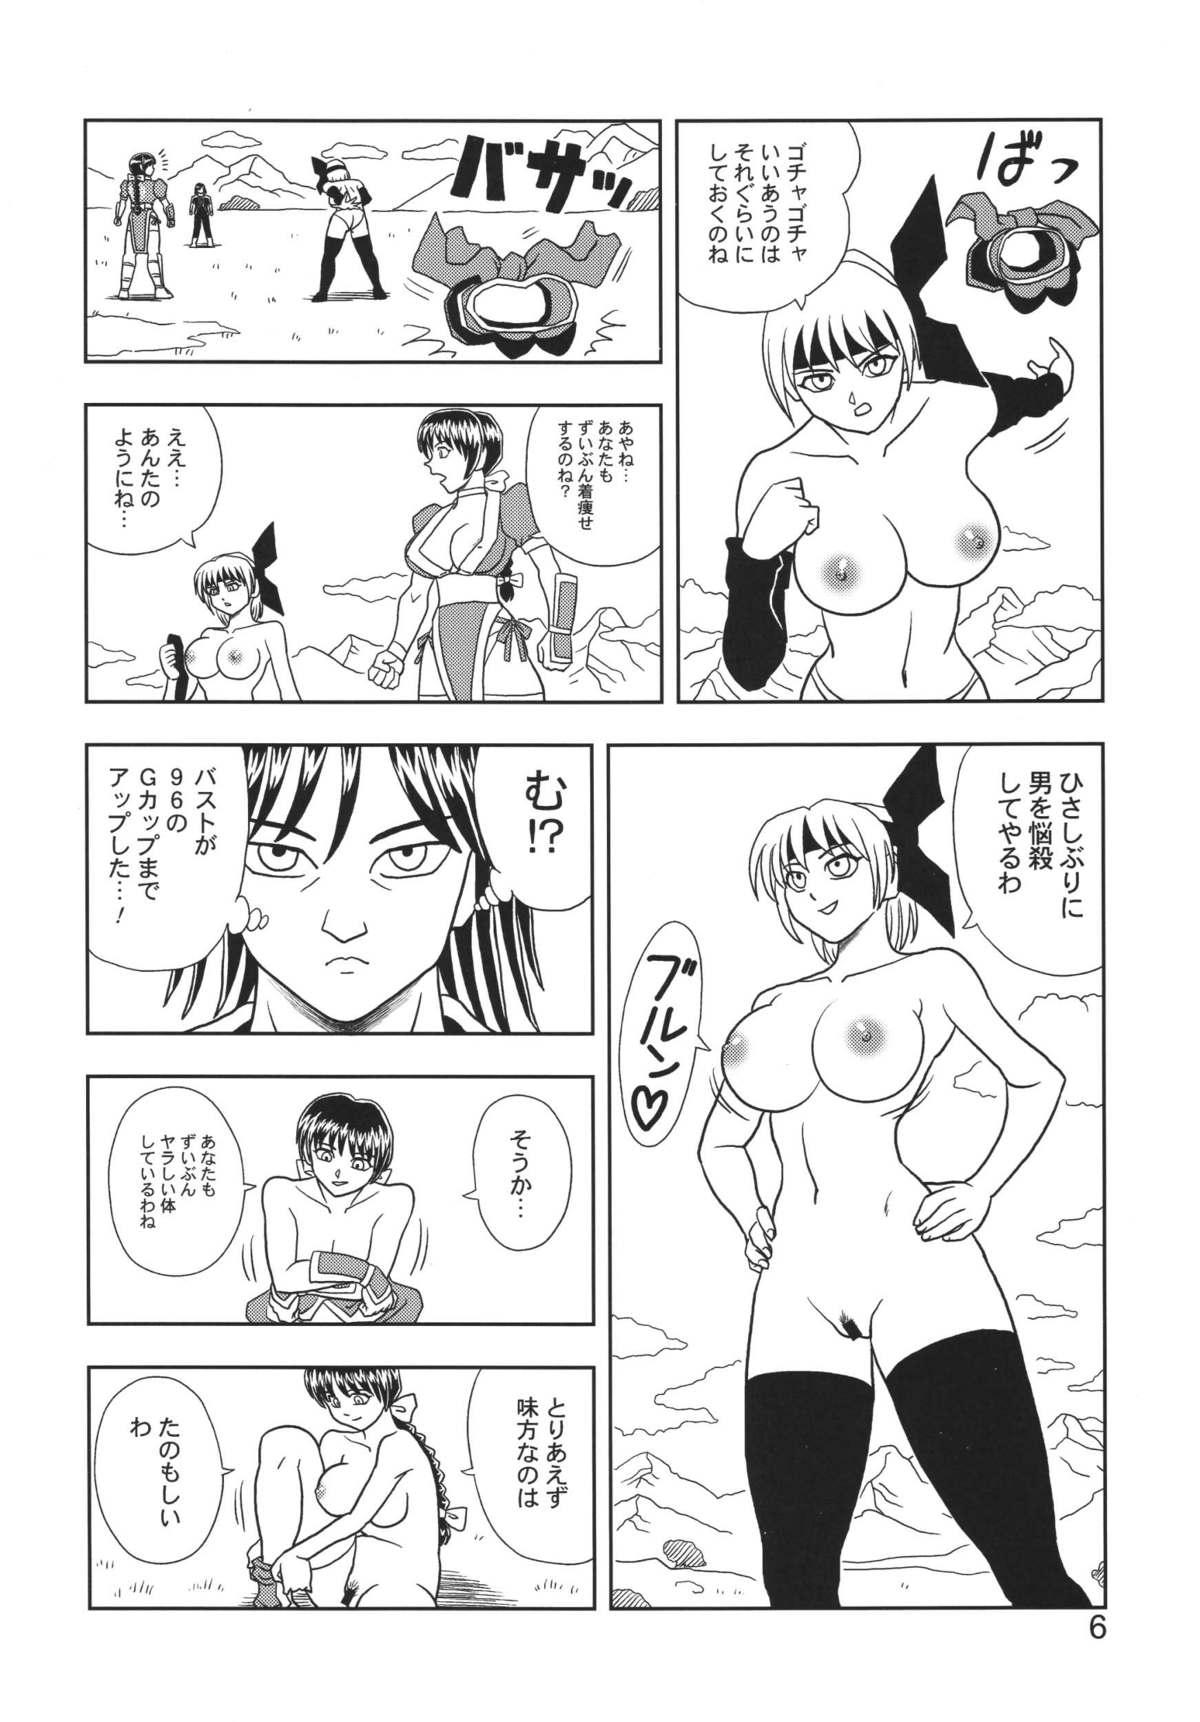 Doggy Style Kasumi or Ayane - Dead or alive Beautiful - Page 6